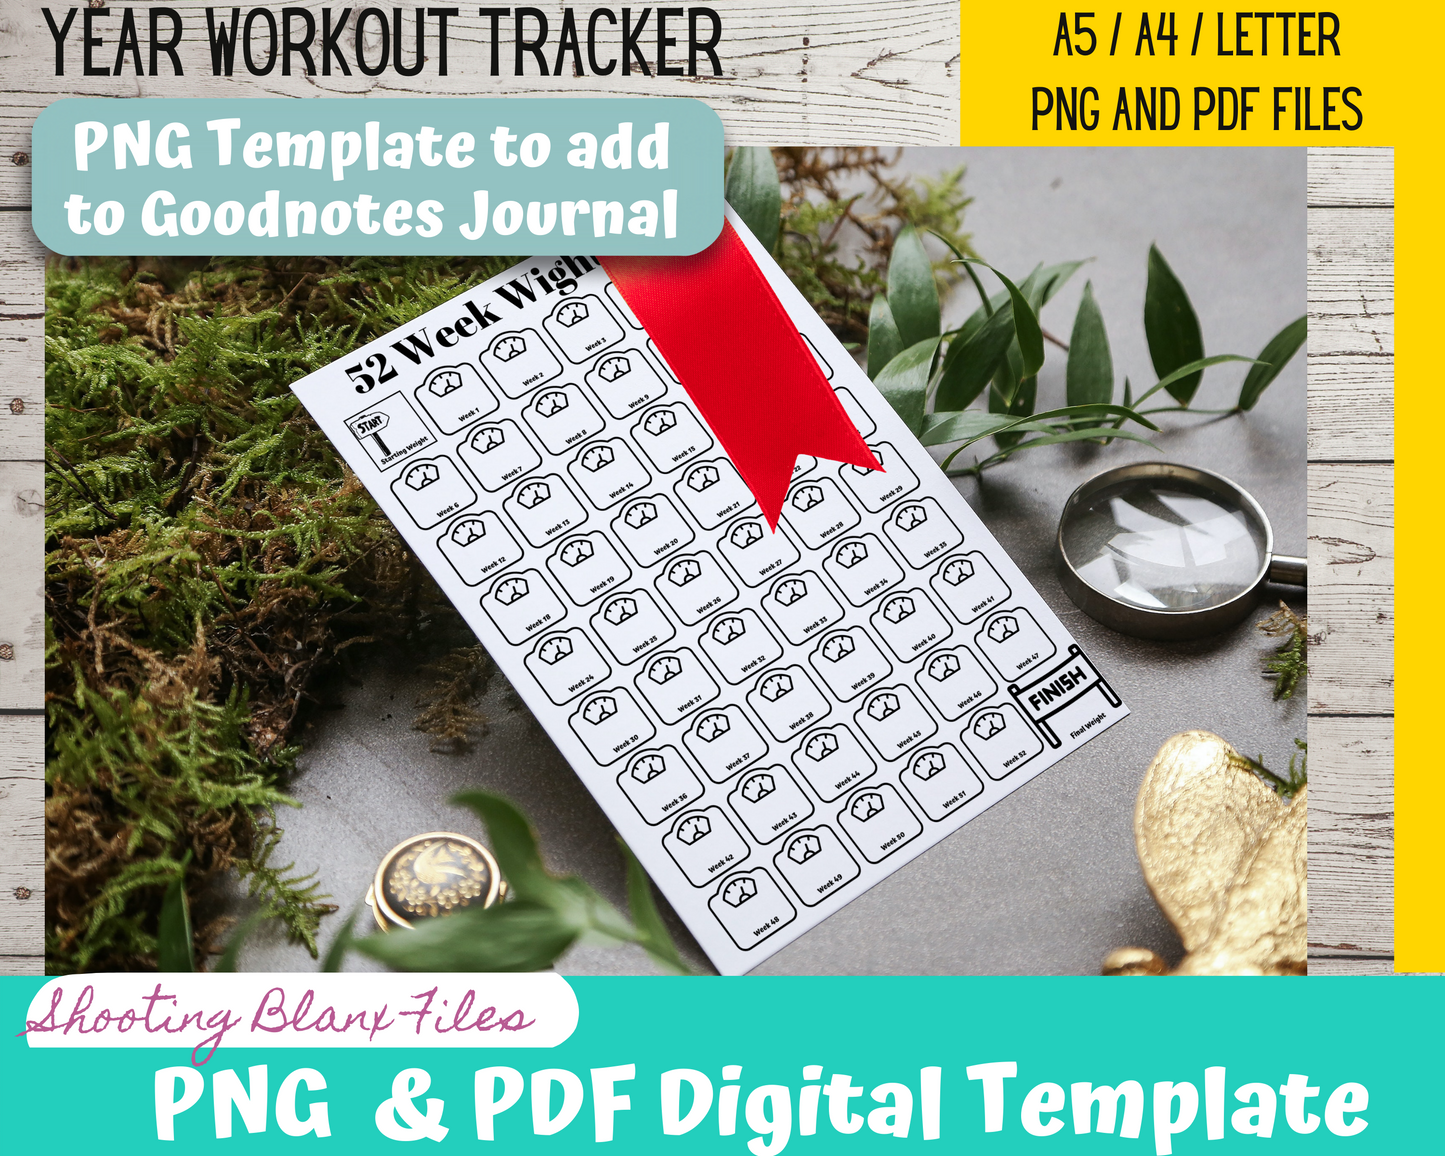 52 Week Weight Tracker / year at a glance tracker / Weight loss / Journal / Digital template / Journal Page layout bujo